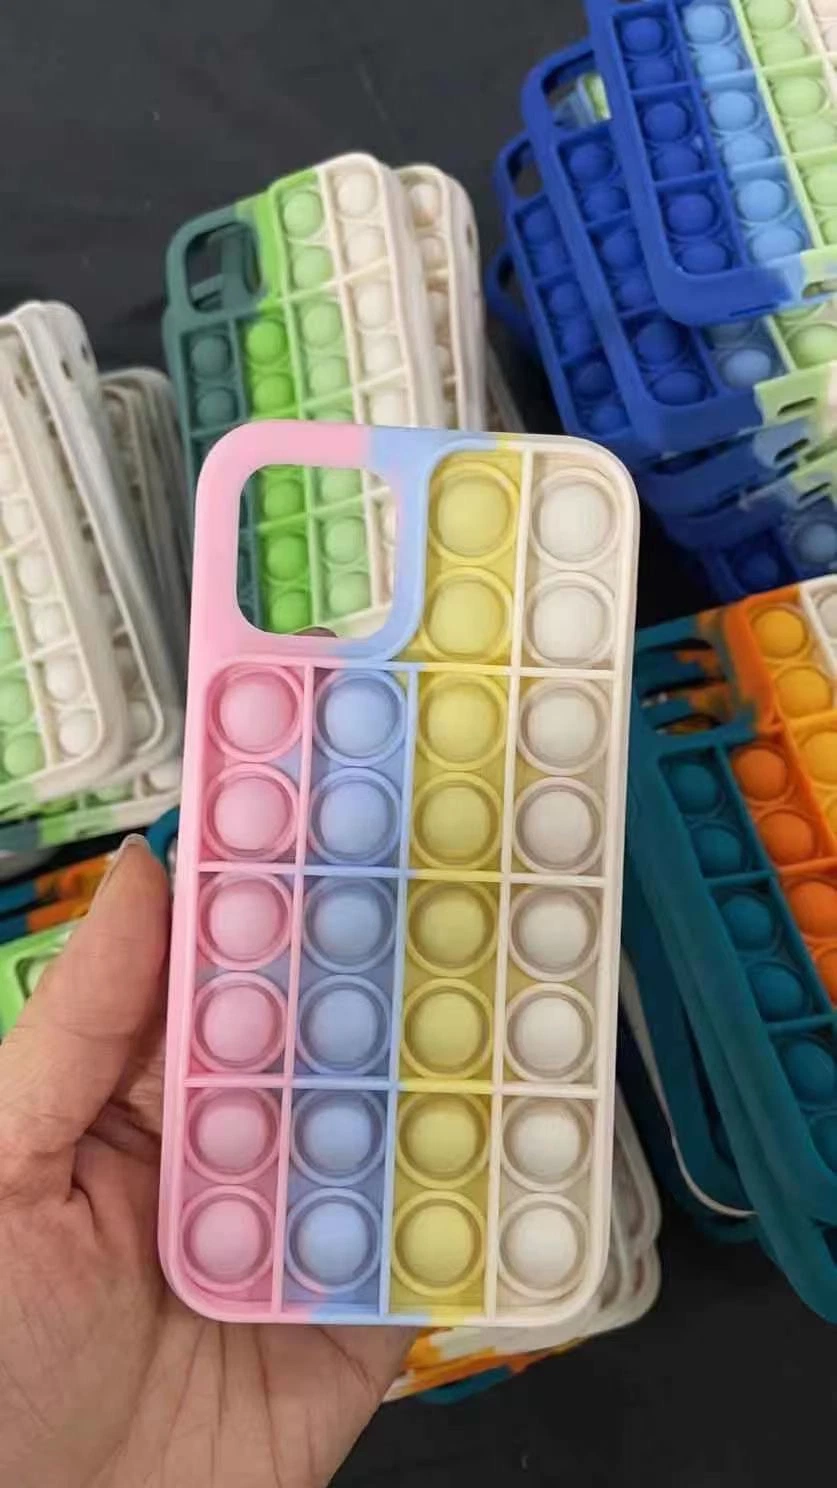 Latest Popular New Design Stress Relief Phone Case Wholesale/Supplier Mobile Phone Accessories Fancy Cover for iPhone 11 12 PRO Max Cell Phone Cover Factory Price Case